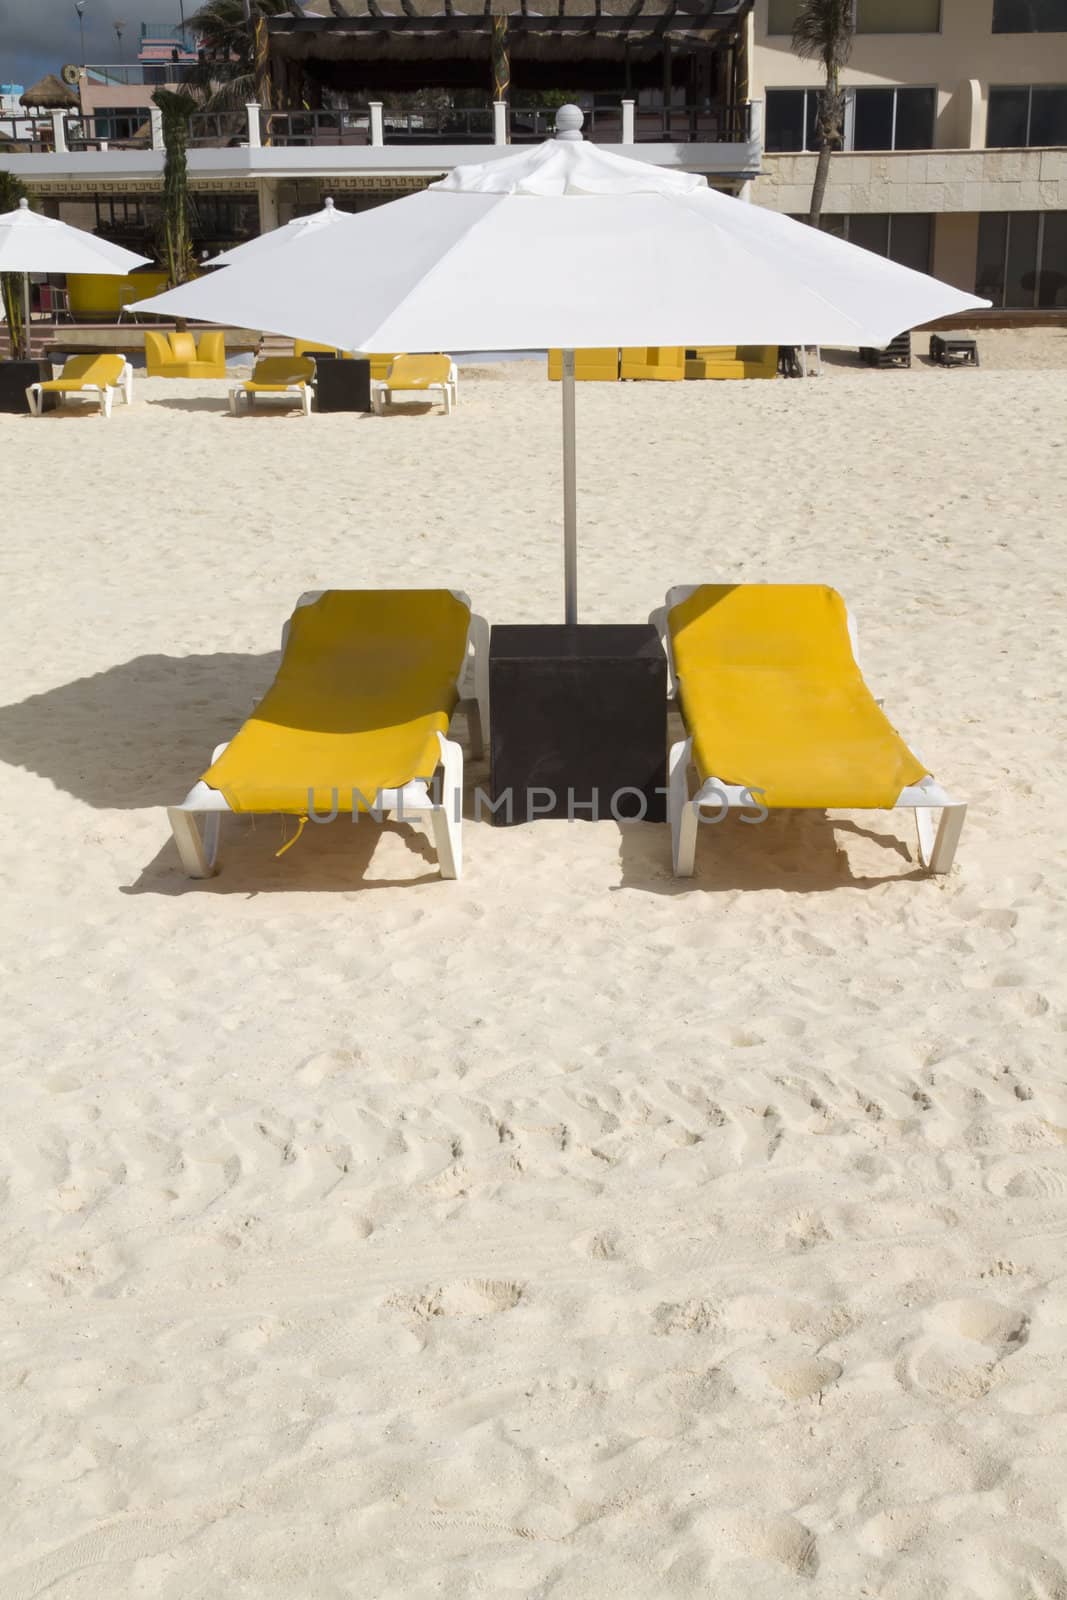 A pair of beach lounge chairs with umbrella